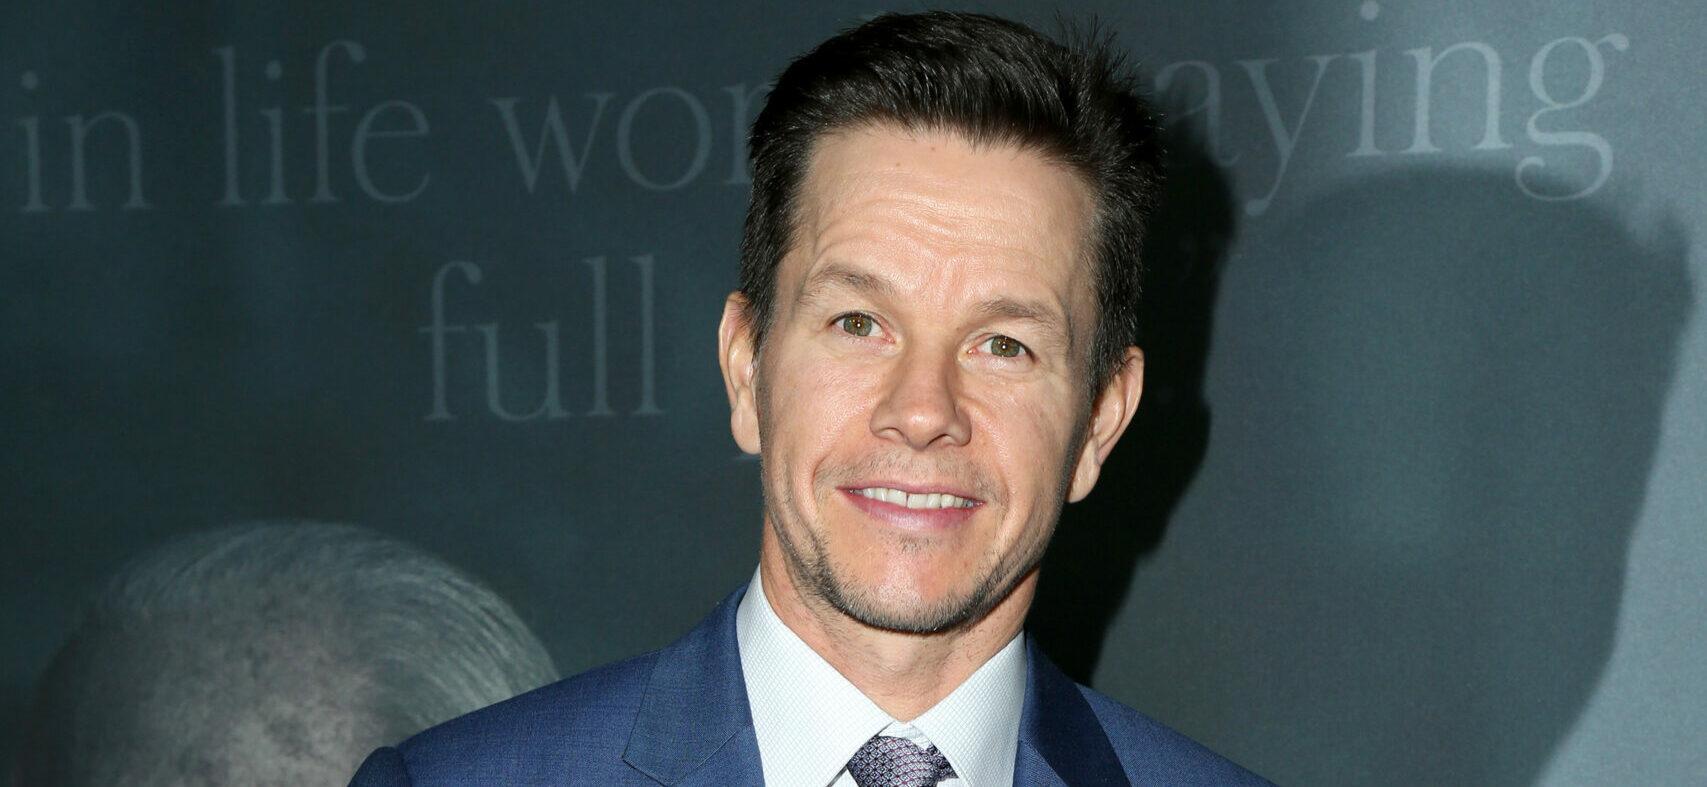 Mark Wahlberg at the "All the Money in the World" Premiere at the Samuel Goldwyn Theater